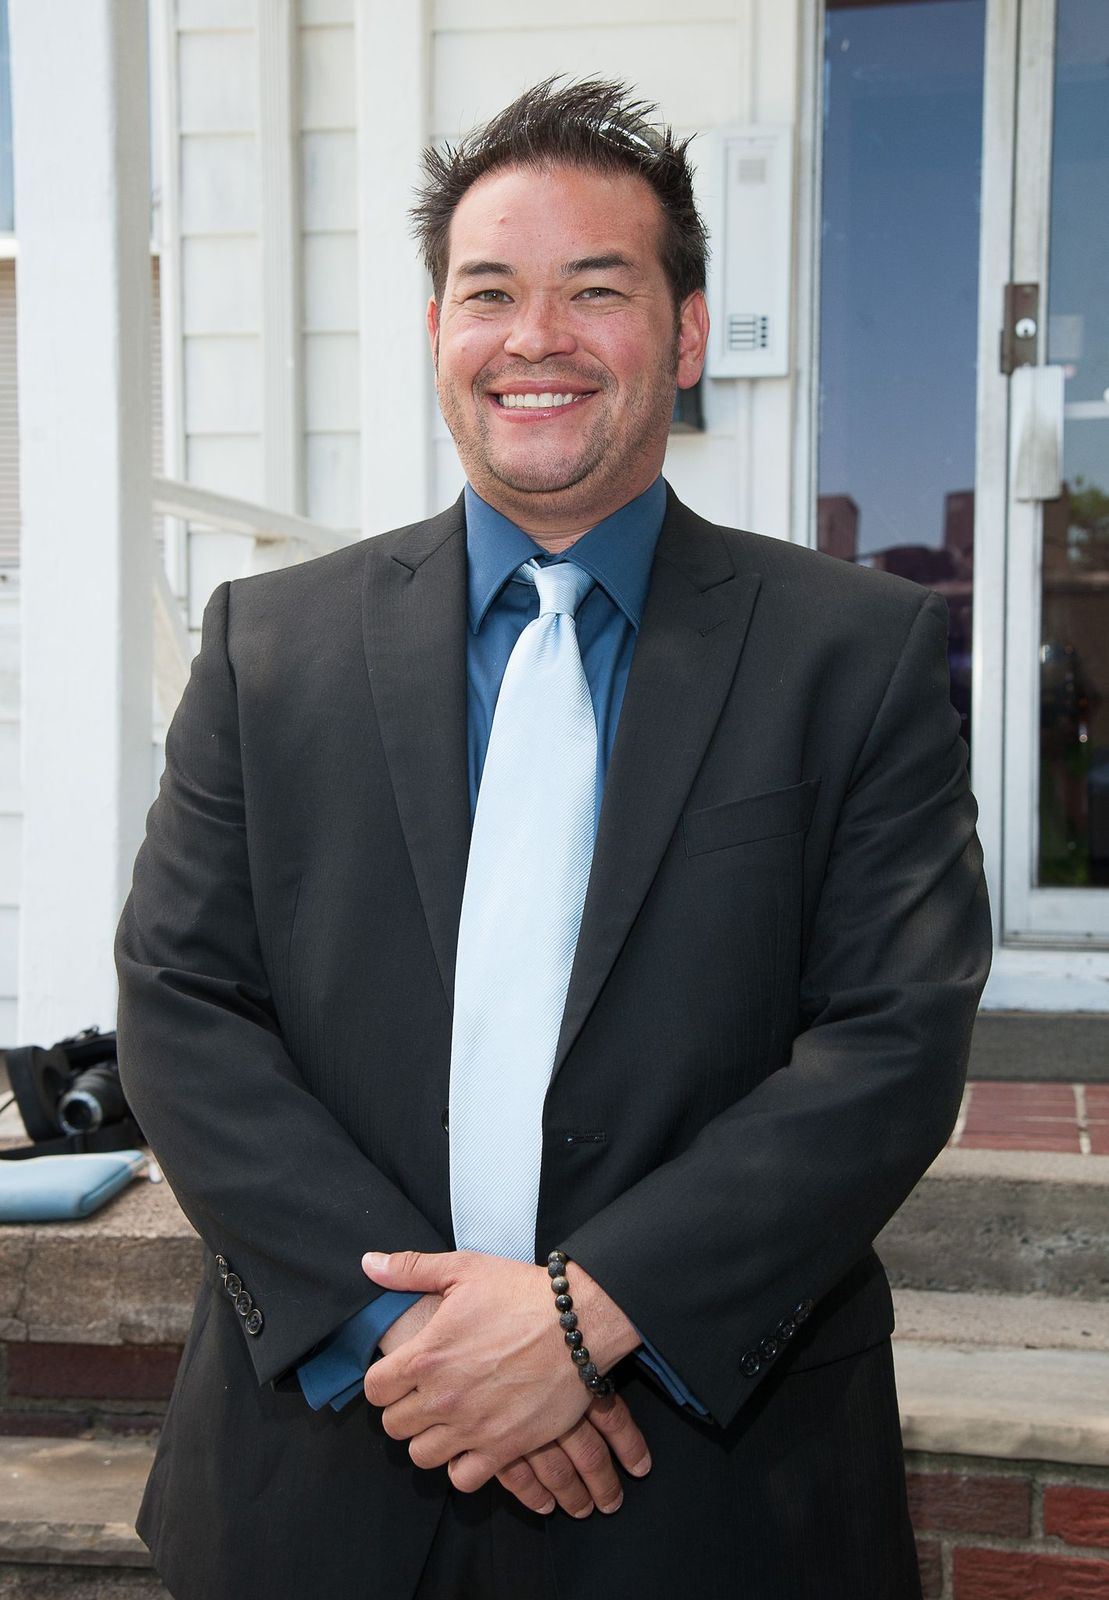 Jon Gosselin at a press conference on Tax Deductible Marriage Counseling at Bergen Marriage Counseling & Psychotherapy on June 27, 2012, in Teaneck, New Jersey | Photo: Getty Images